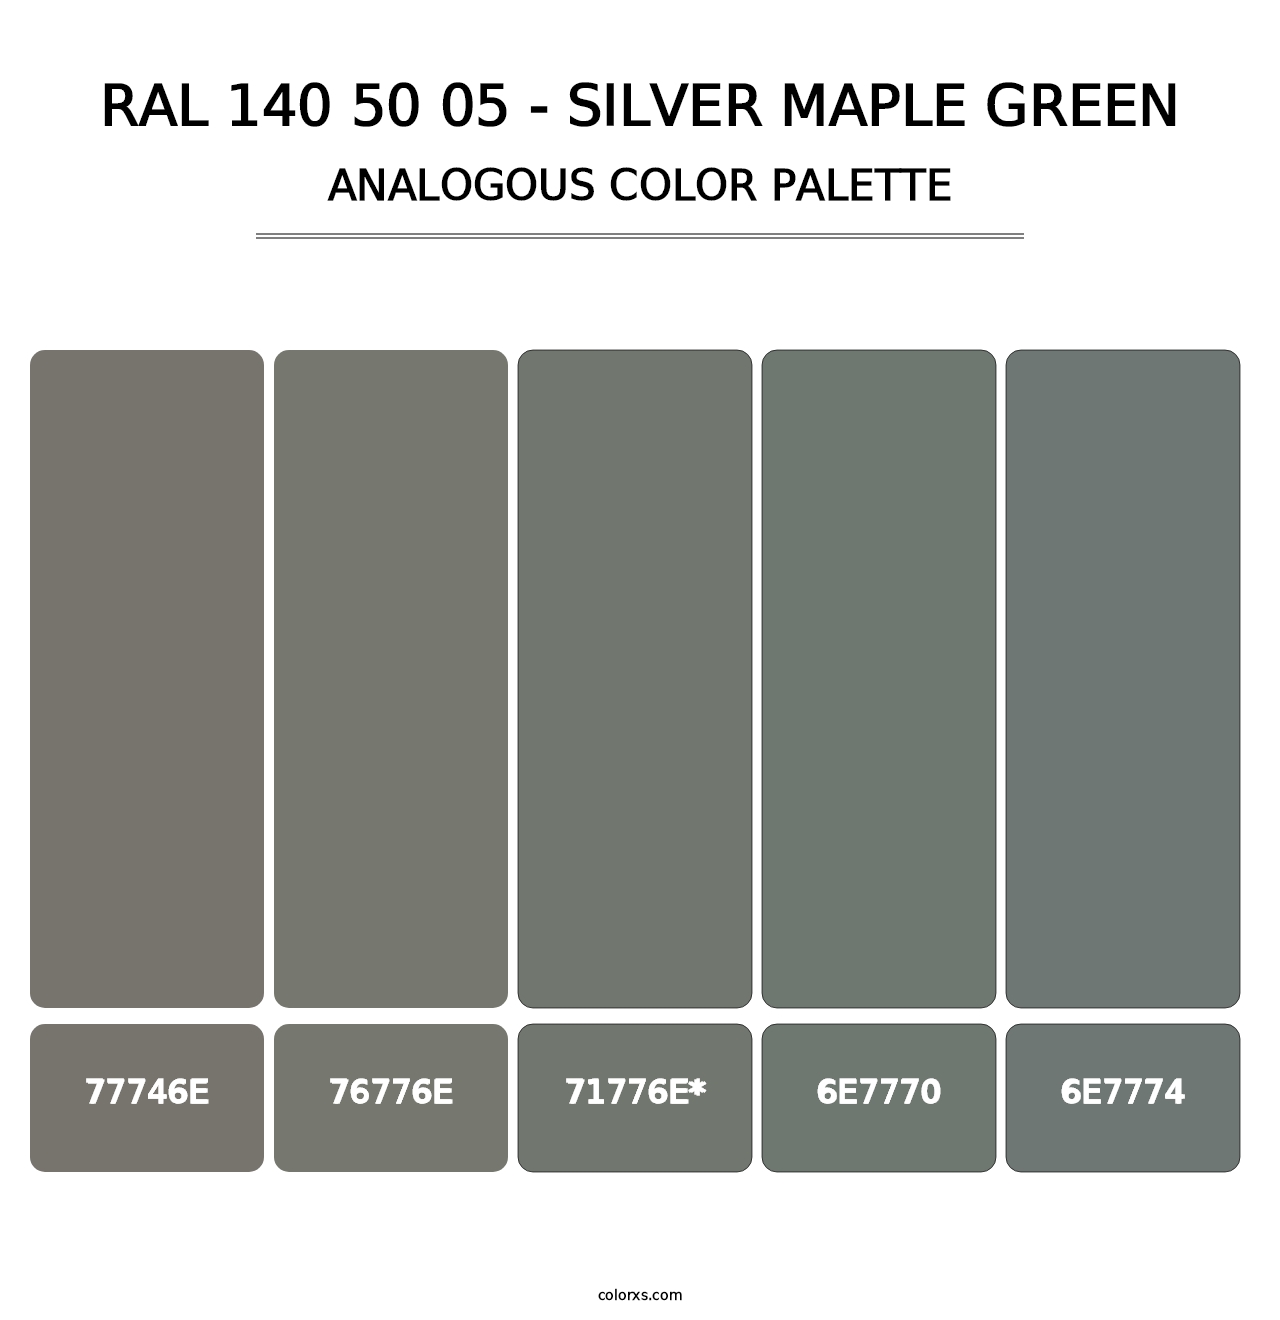 RAL 140 50 05 - Silver Maple Green - Analogous Color Palette